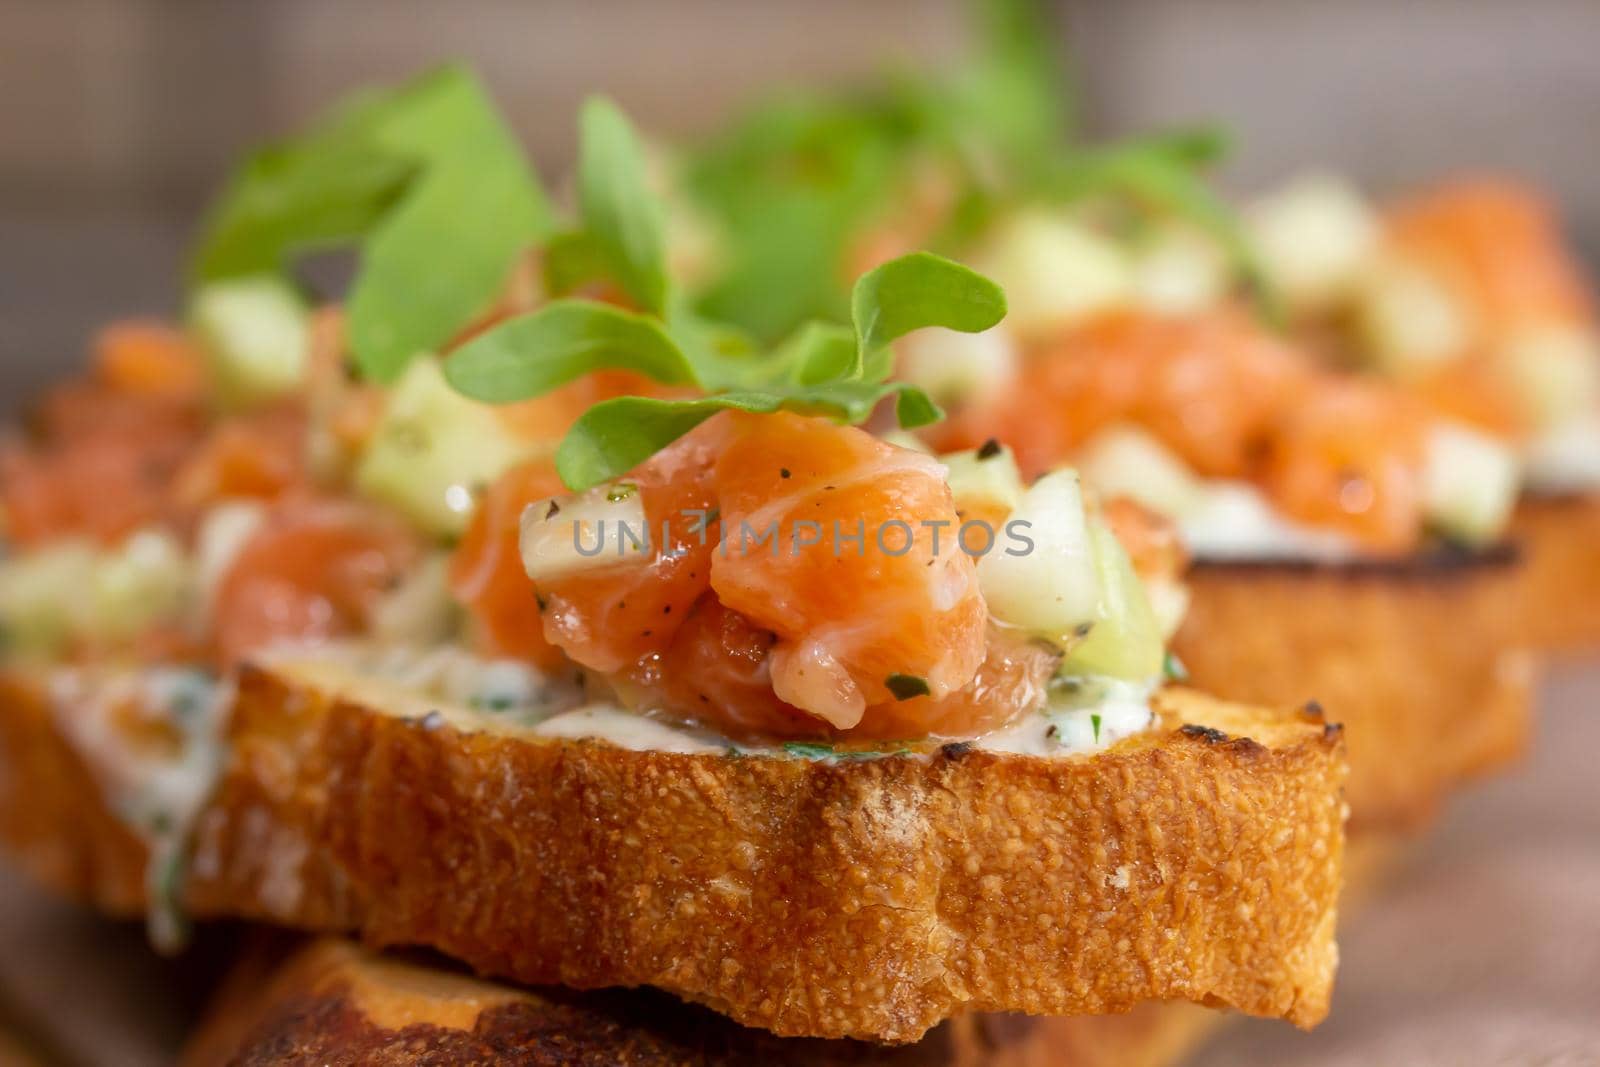 dry aged smoked salmon on the slices of bread and cream cheese sandwiches with cherry tomatoes and rocket salad.